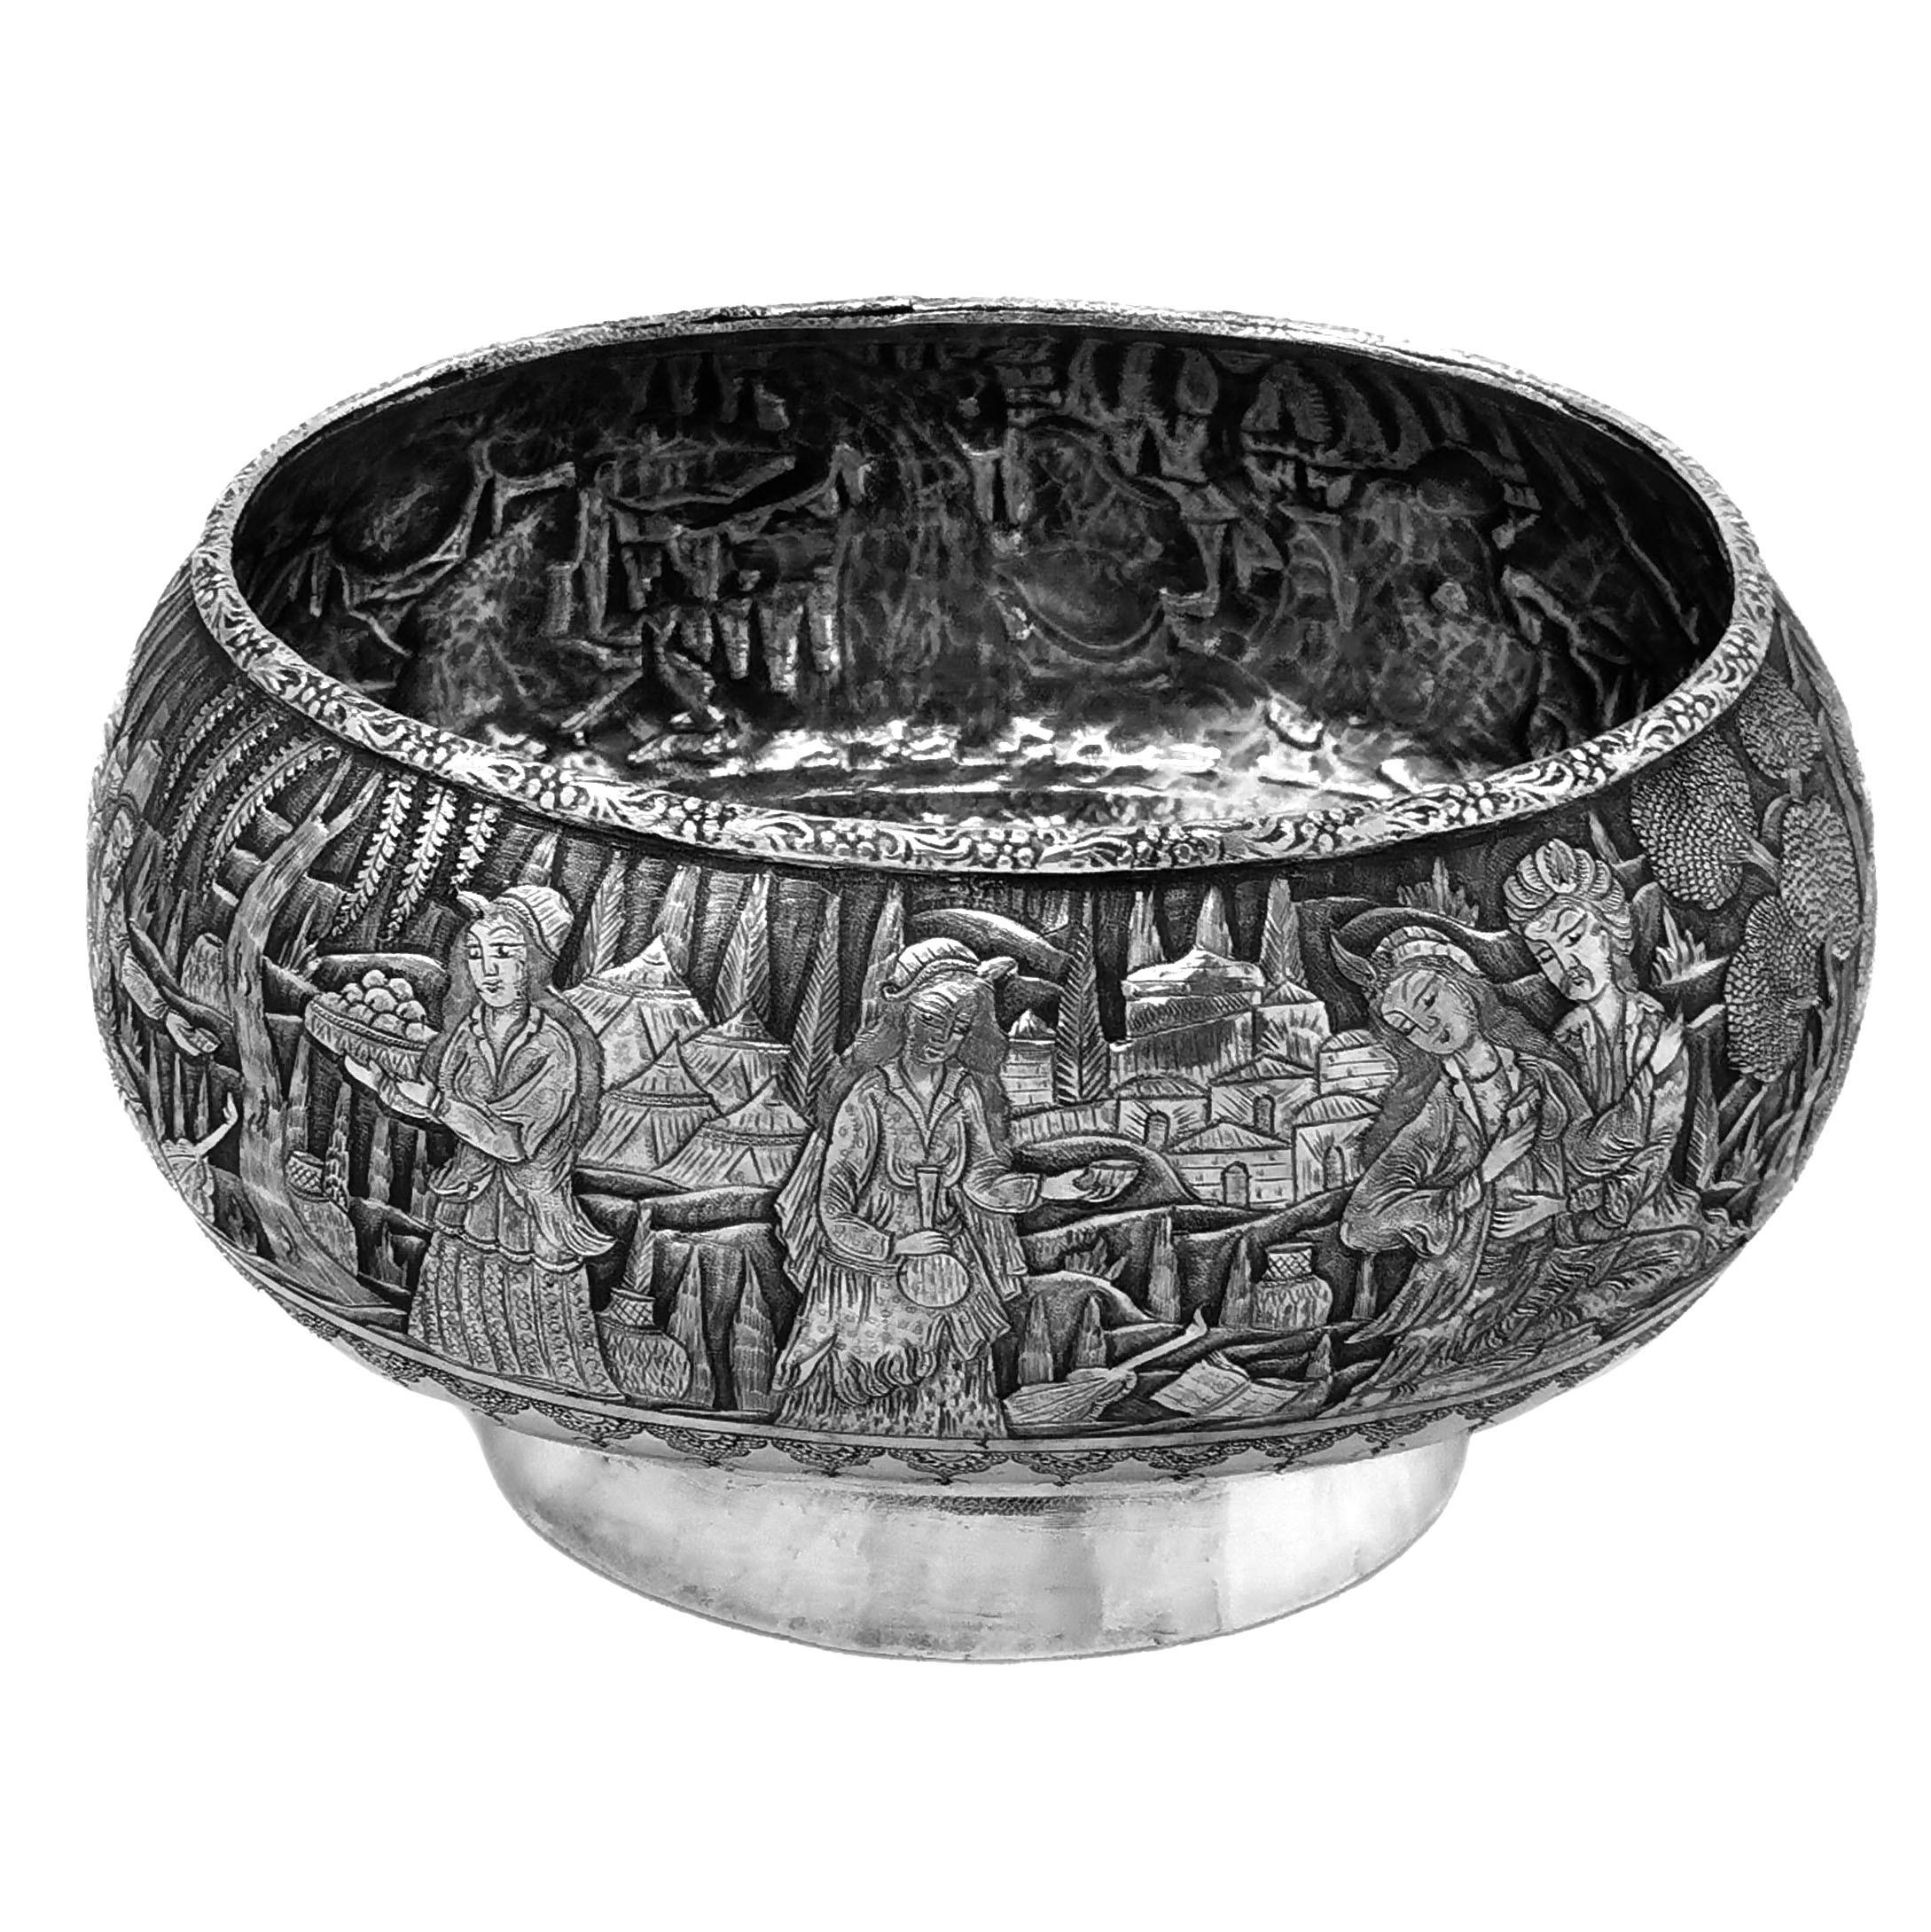 Vintage Persian Solid Silver Lidded Box / Bowl Iran, c. 1940 For Sale 3